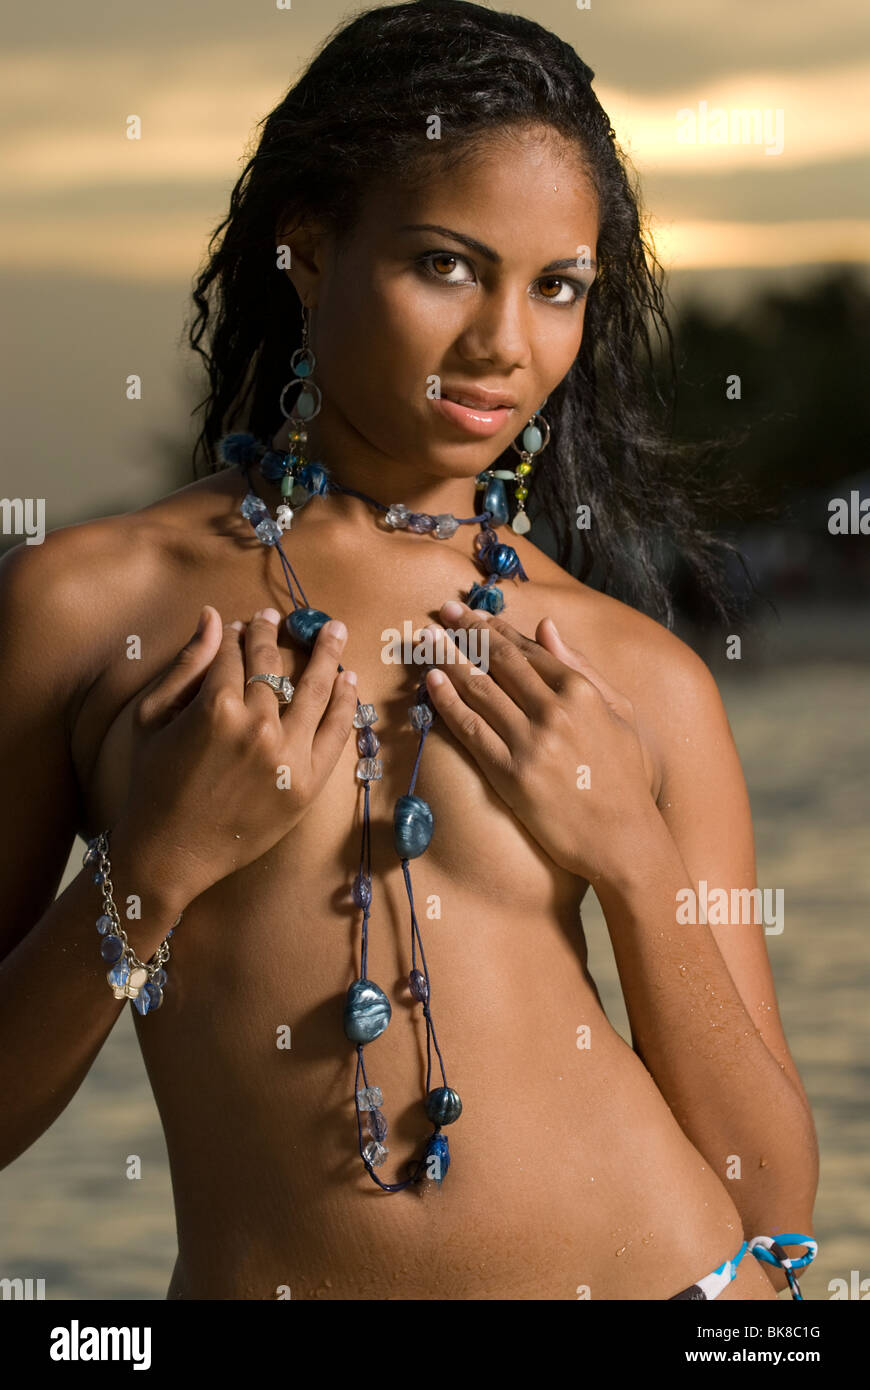 Beautiful young woman poses with beads and hands covering breasts